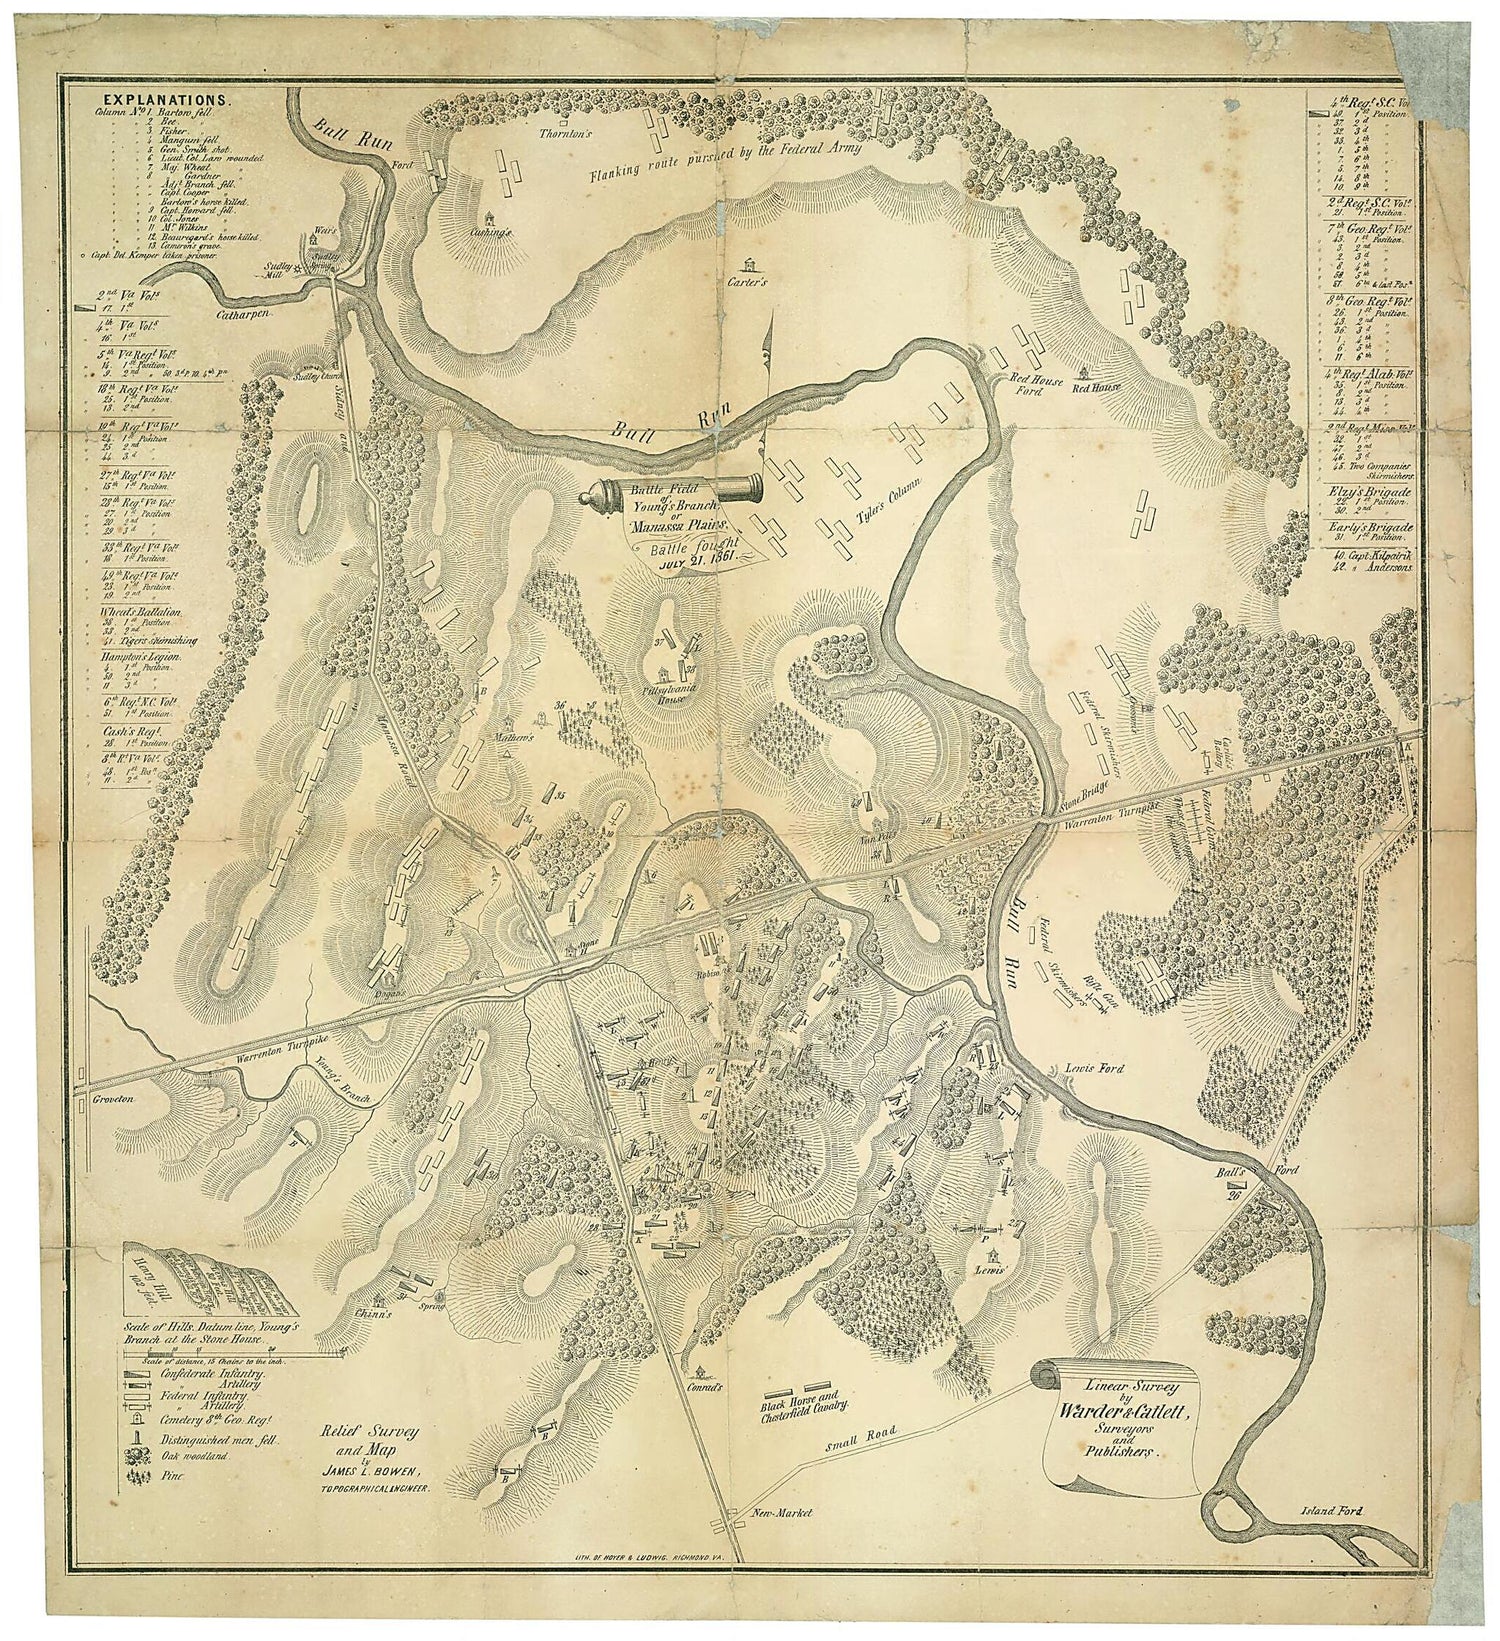 This old map of Battle Field of Young&